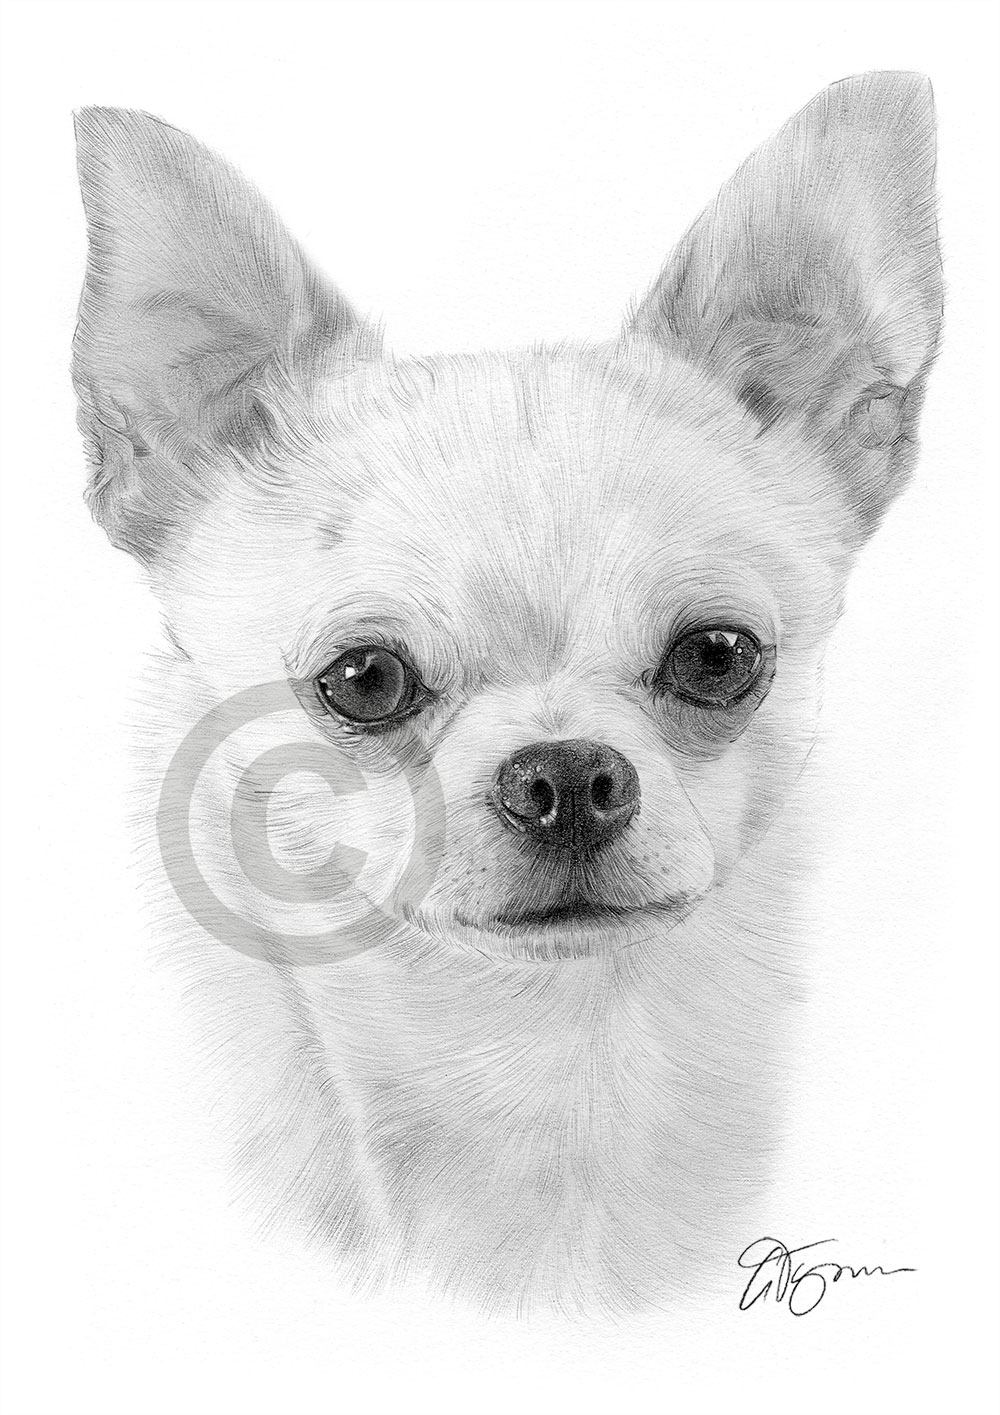 Pencil drawing of an adult Chihuahua by artist Gary Tymon